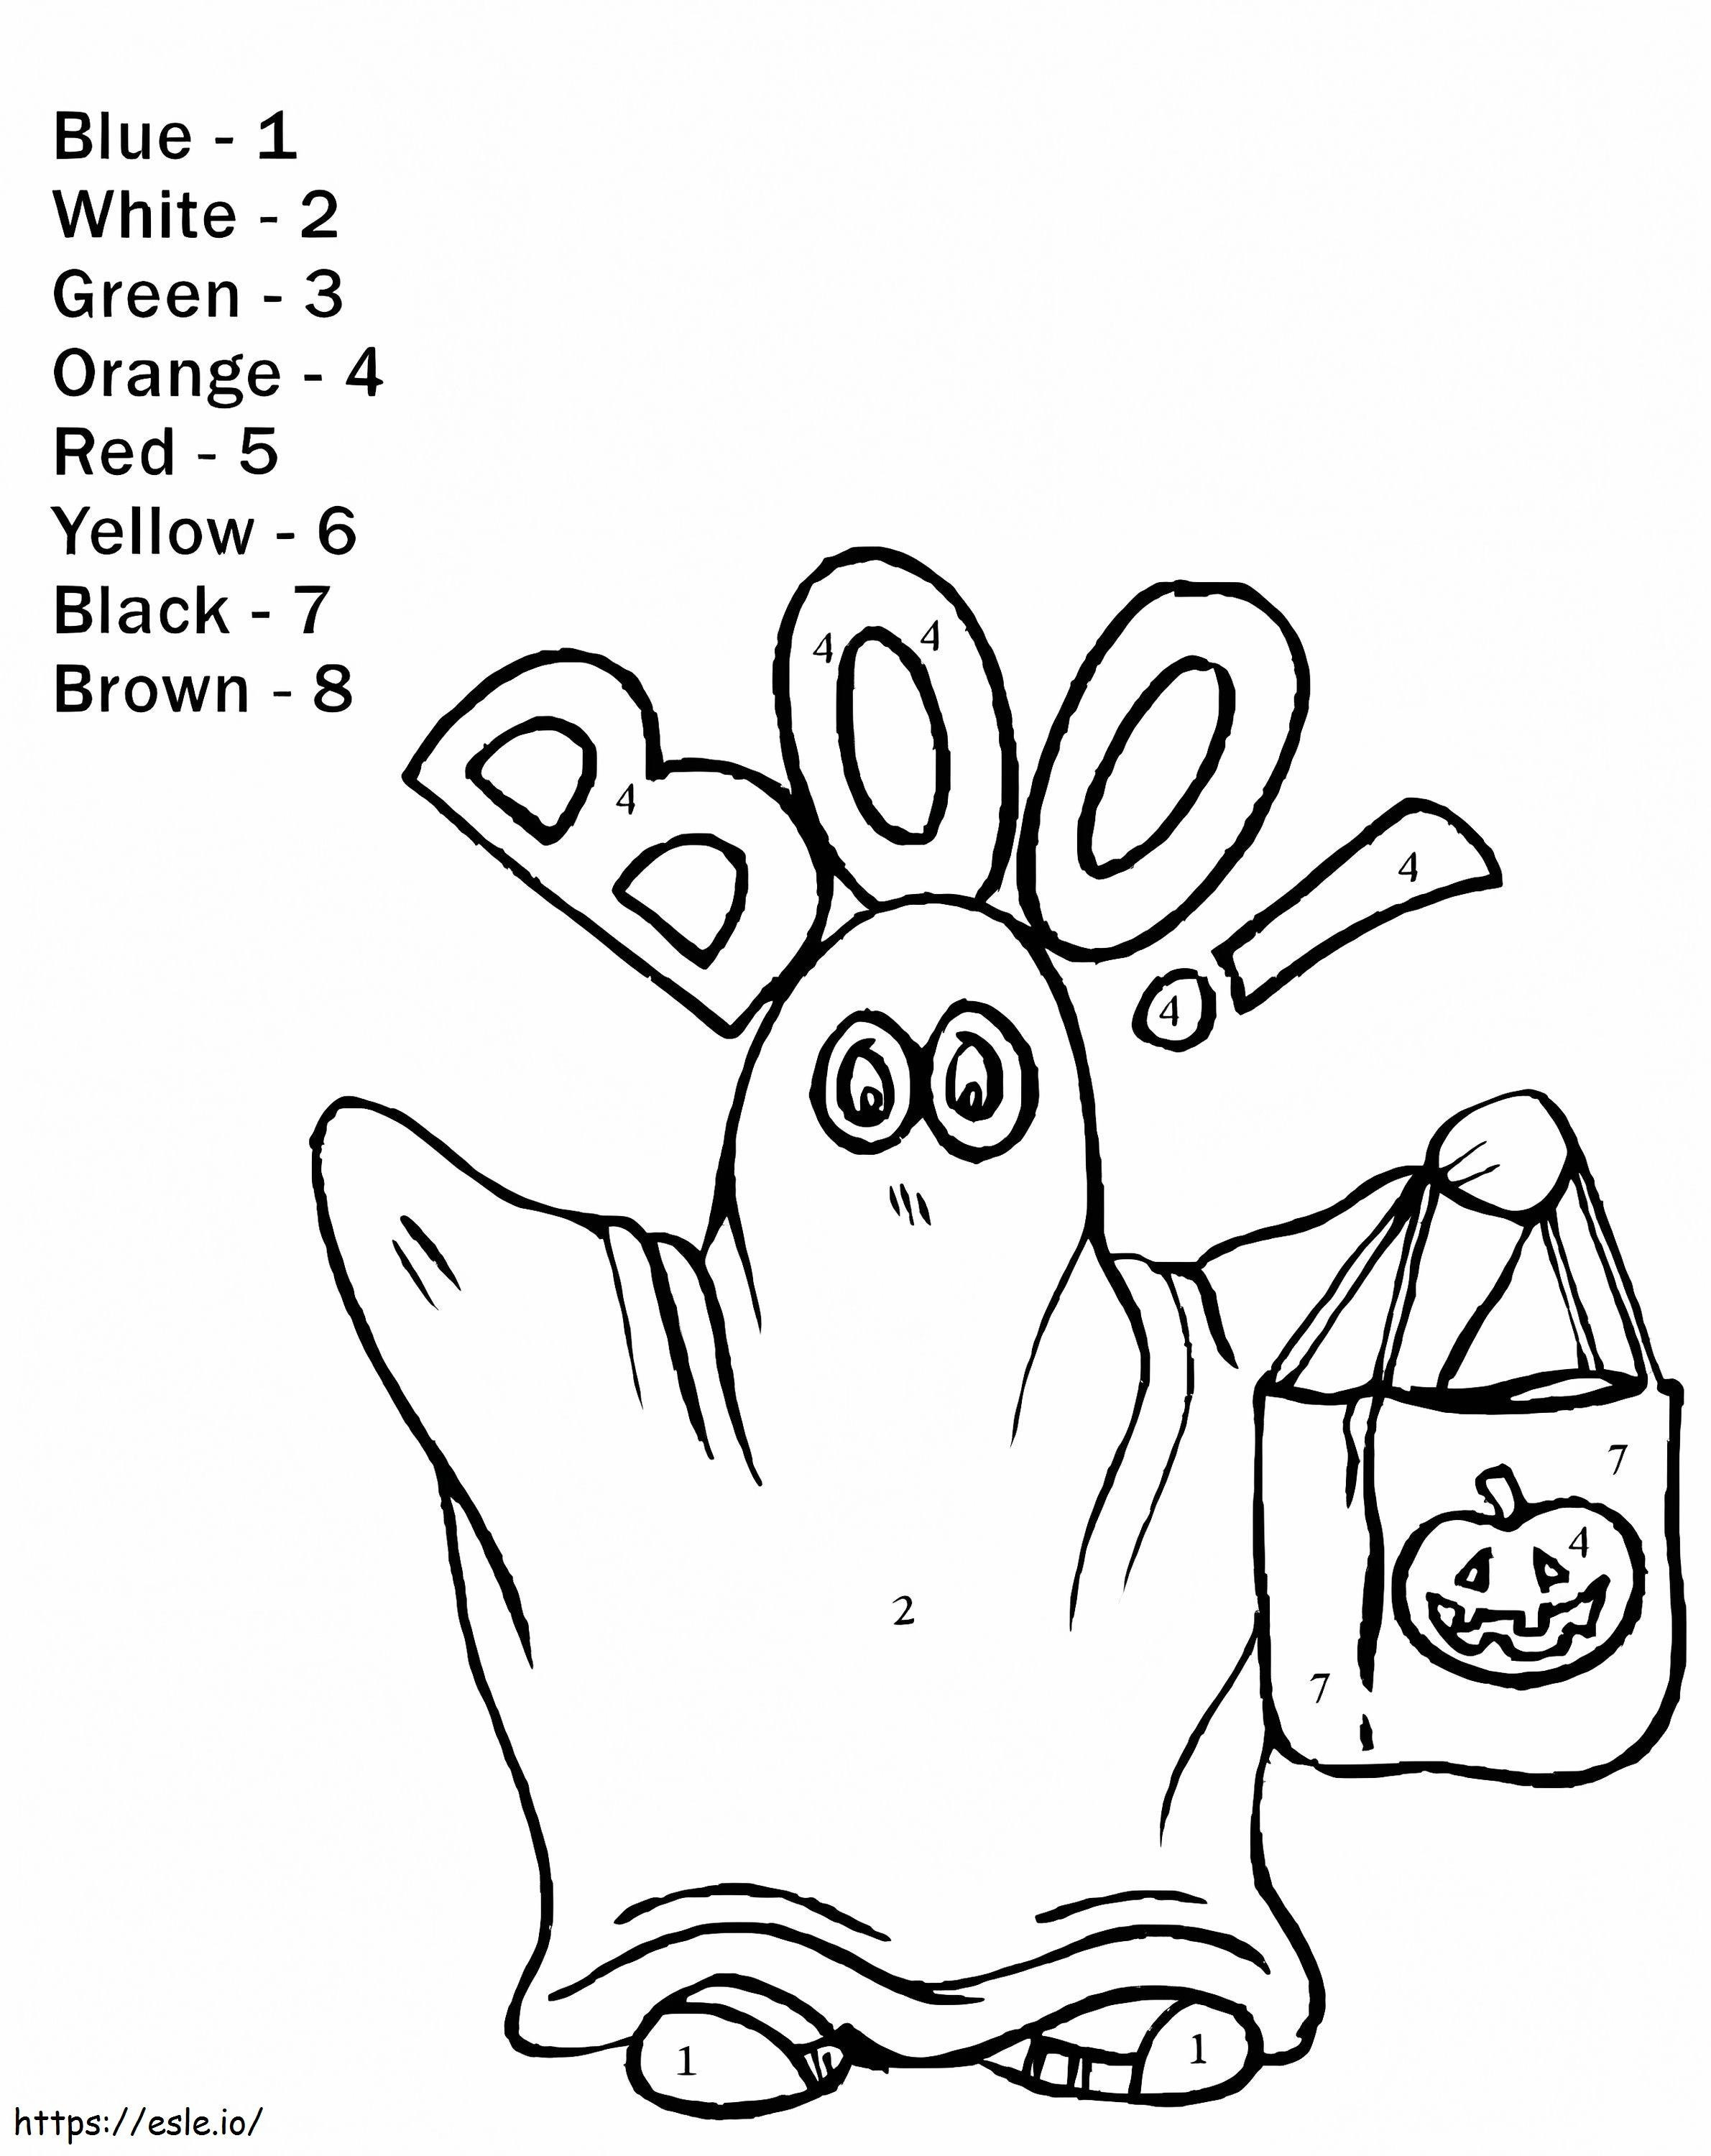 Ghost Color By Number coloring page